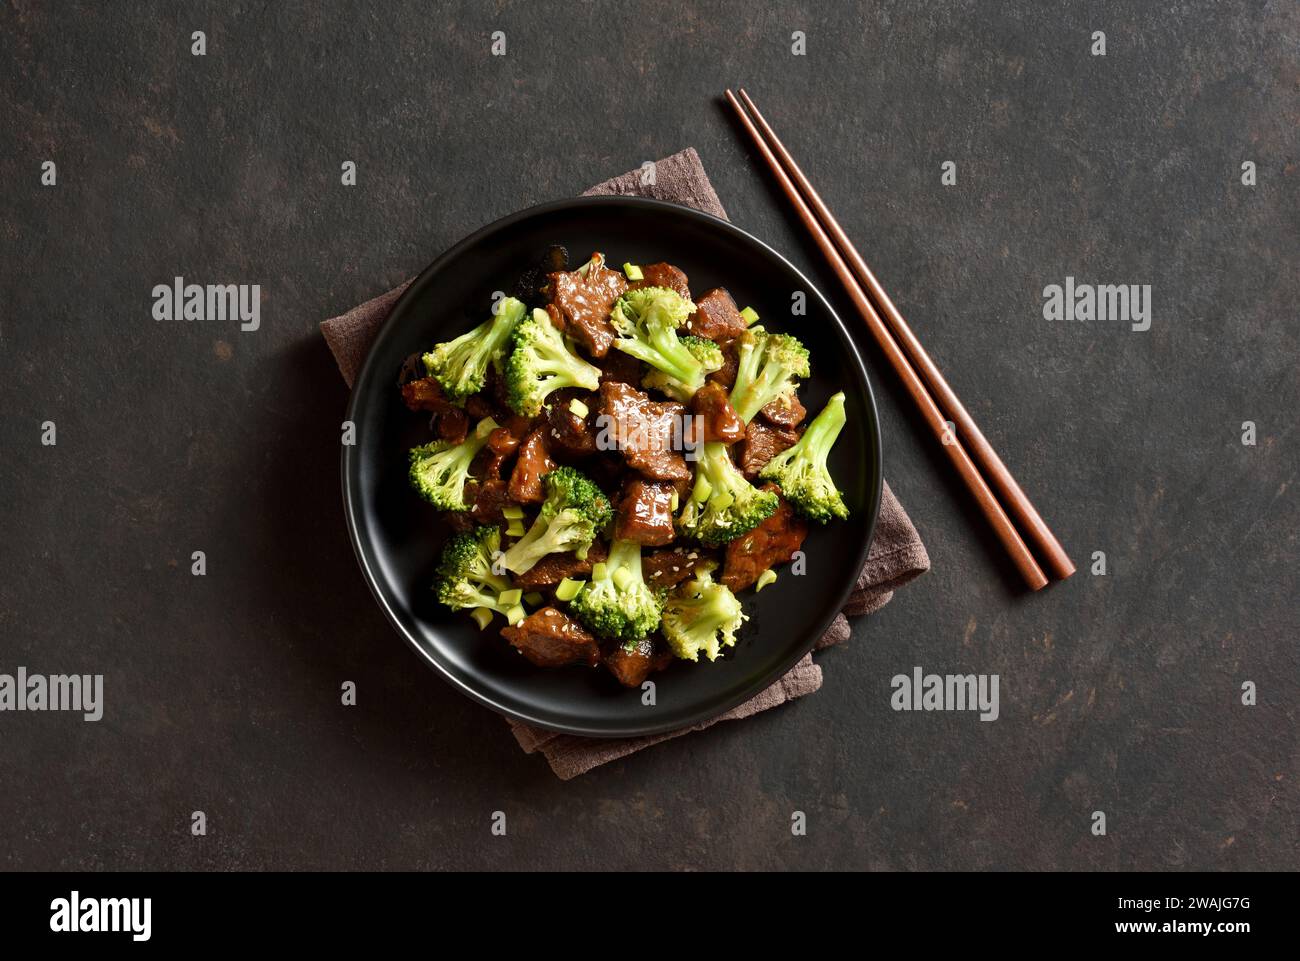 Beef with broccoli on plate over dark stone background with free space. Thinly sliced beef meat with roasted broccoli. Top view, flat lay Stock Photo